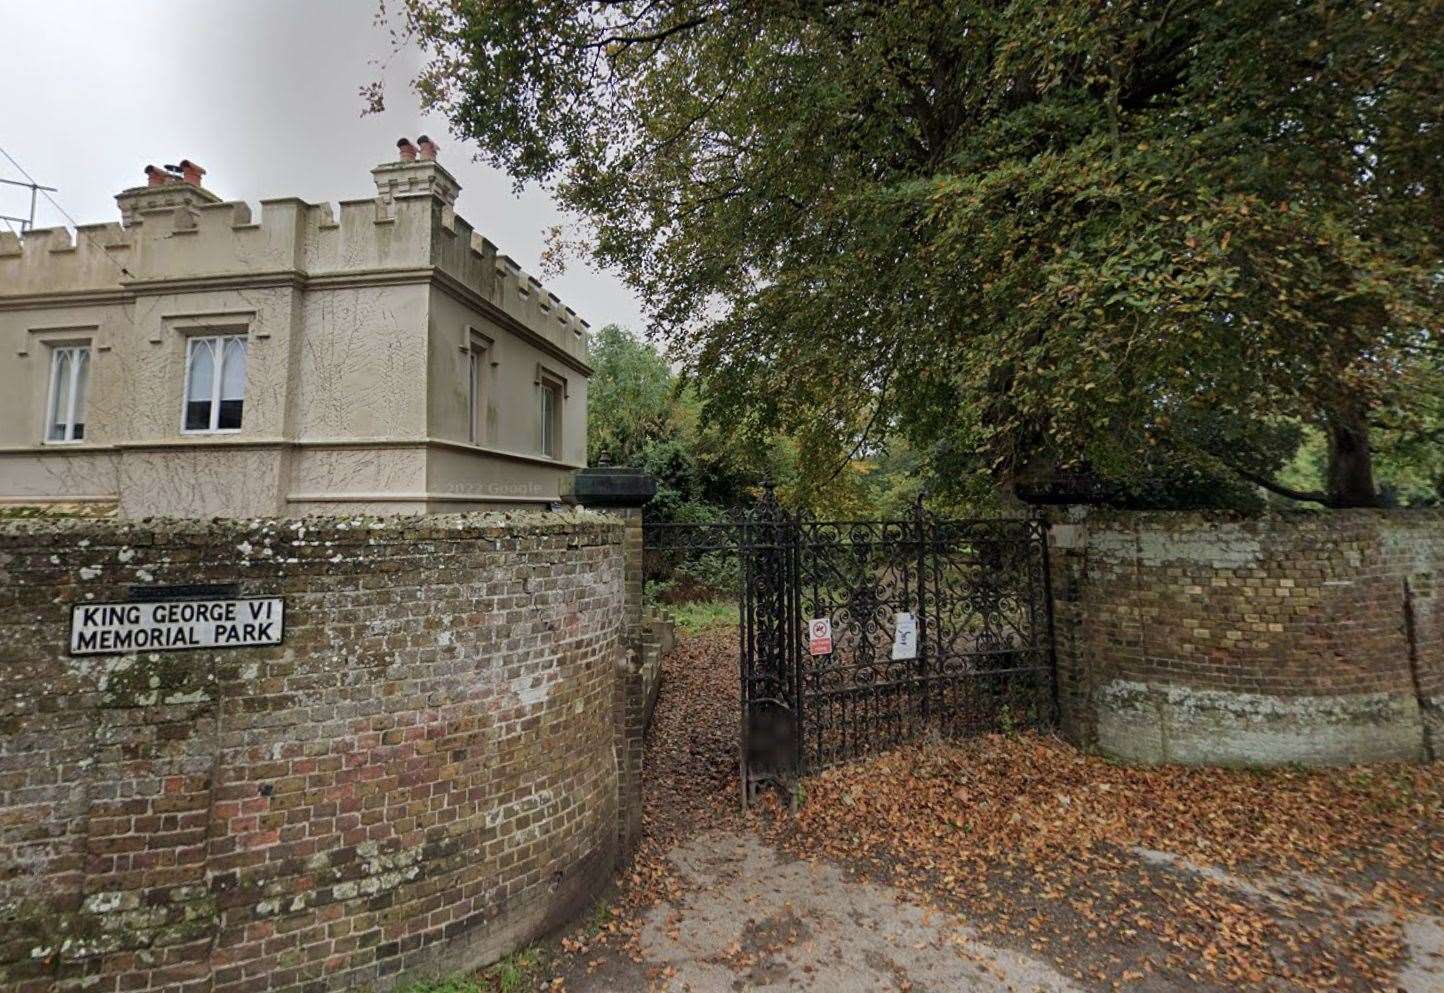 Police said a ‘collection of dead animals’ was found in King George VI Memorial Park, RamsgatePicture: Google